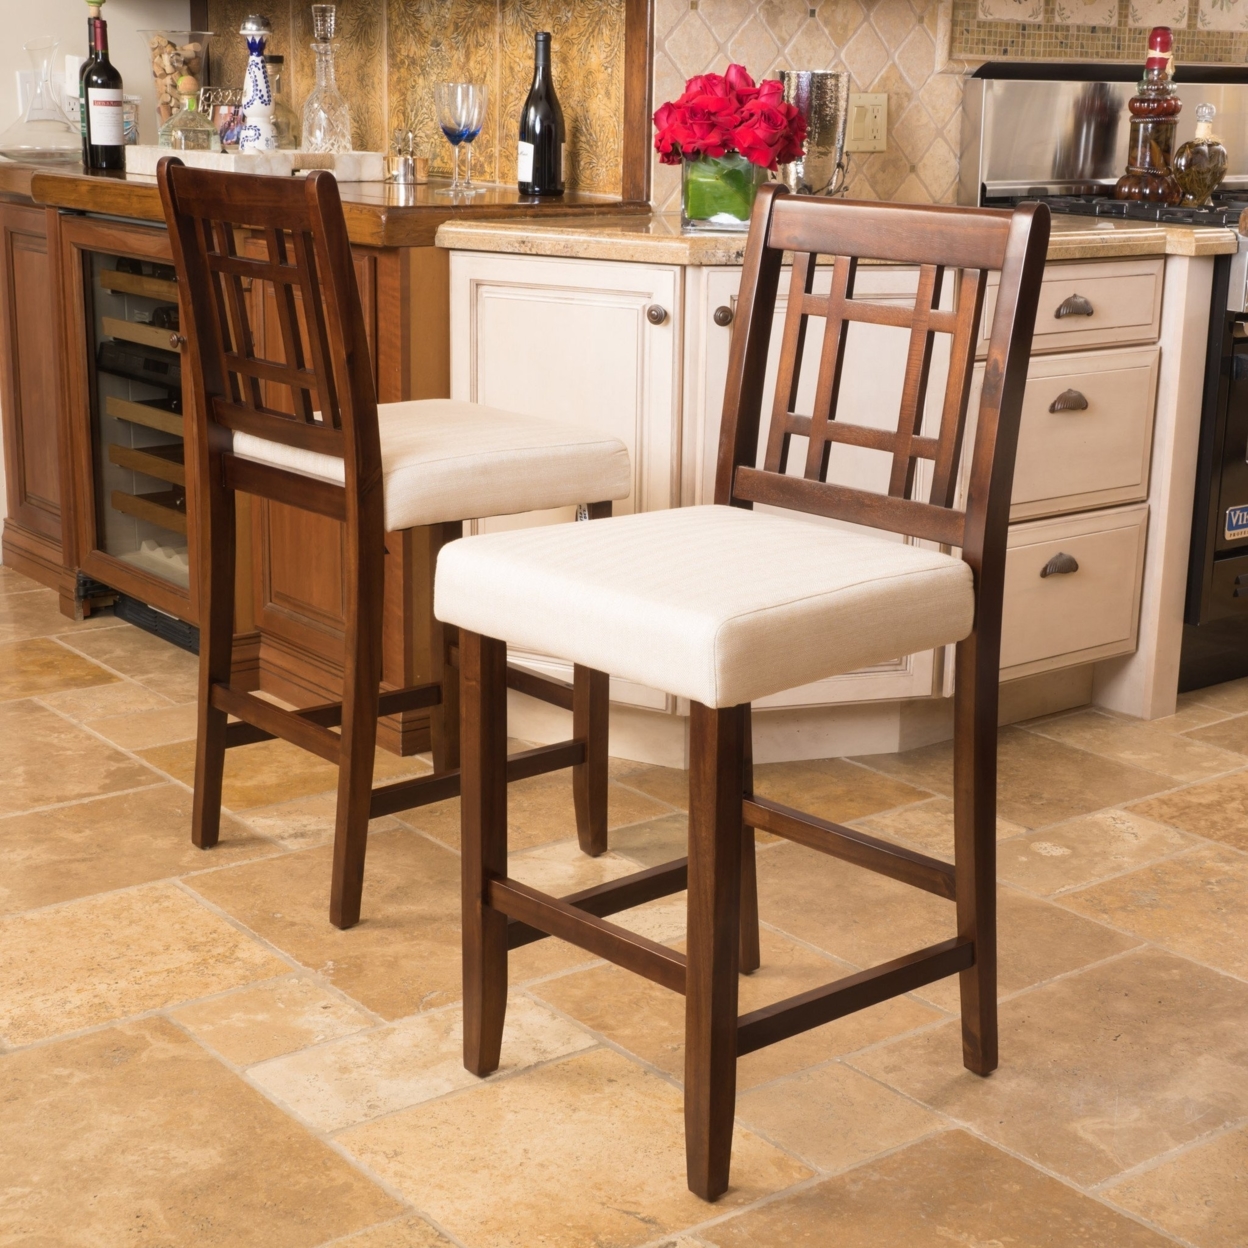 Etodens 26-Inch Brown Mahogany Acacia Counterstool With Beige Cushion (Set Of 2)